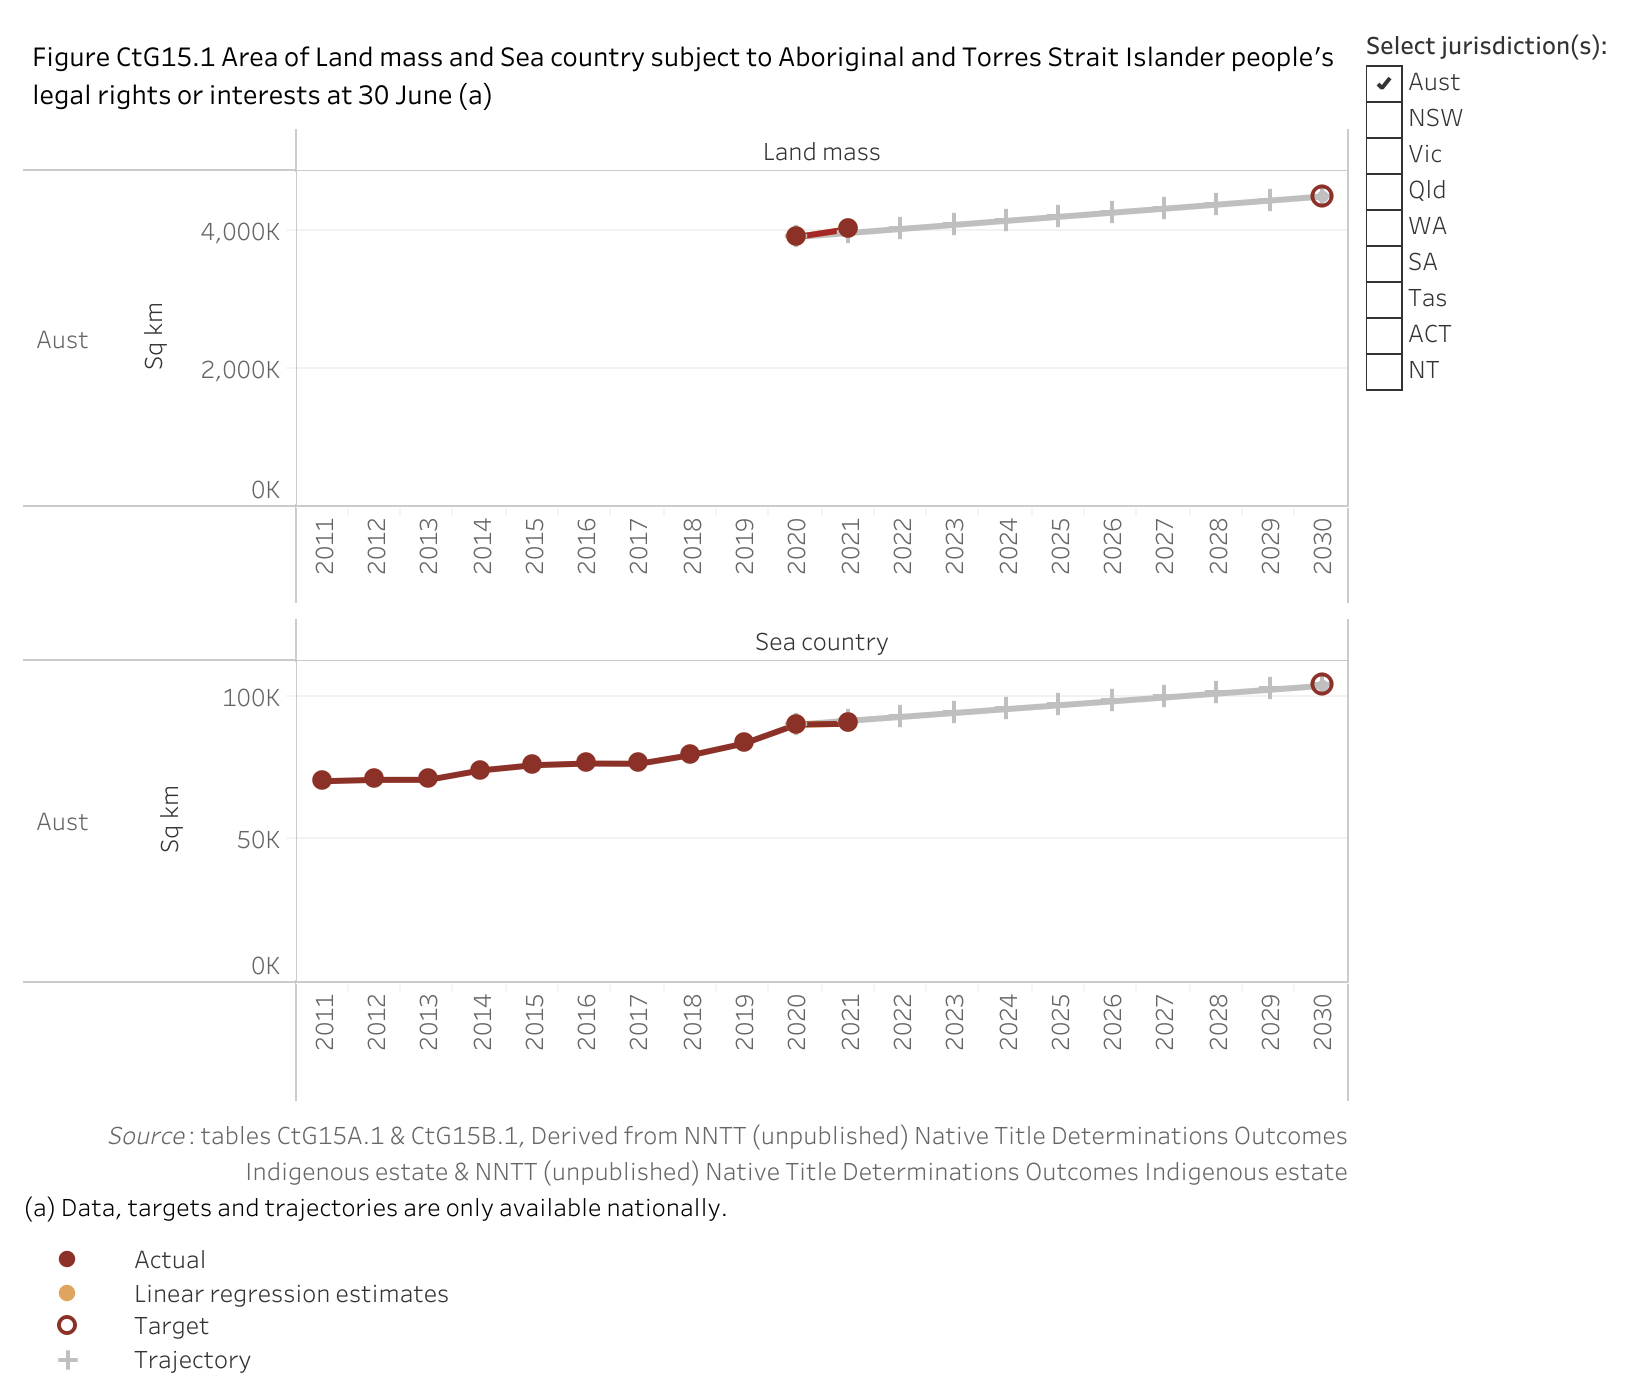 Figure CtG15.1. Line charts showing the land mass and sea country of Australia subject to Aboriginal and Torres Strait Islander people’s legal rights or interests. Along with these areas, a linear regression is displayed that shows the data trend for the target. The aim under Closing the Gap is to increase the coverage by 15 per cent by 2030. With the 2020 land mass baseline value of 3,911,679 square kilometres this means an increase to a target value of 4,498,431 square kilometres by 2030. With the 2020 sea country baseline value of 90,252 square kilometres, this means an increase to a target value of 103,790 square kilometres by 2030.